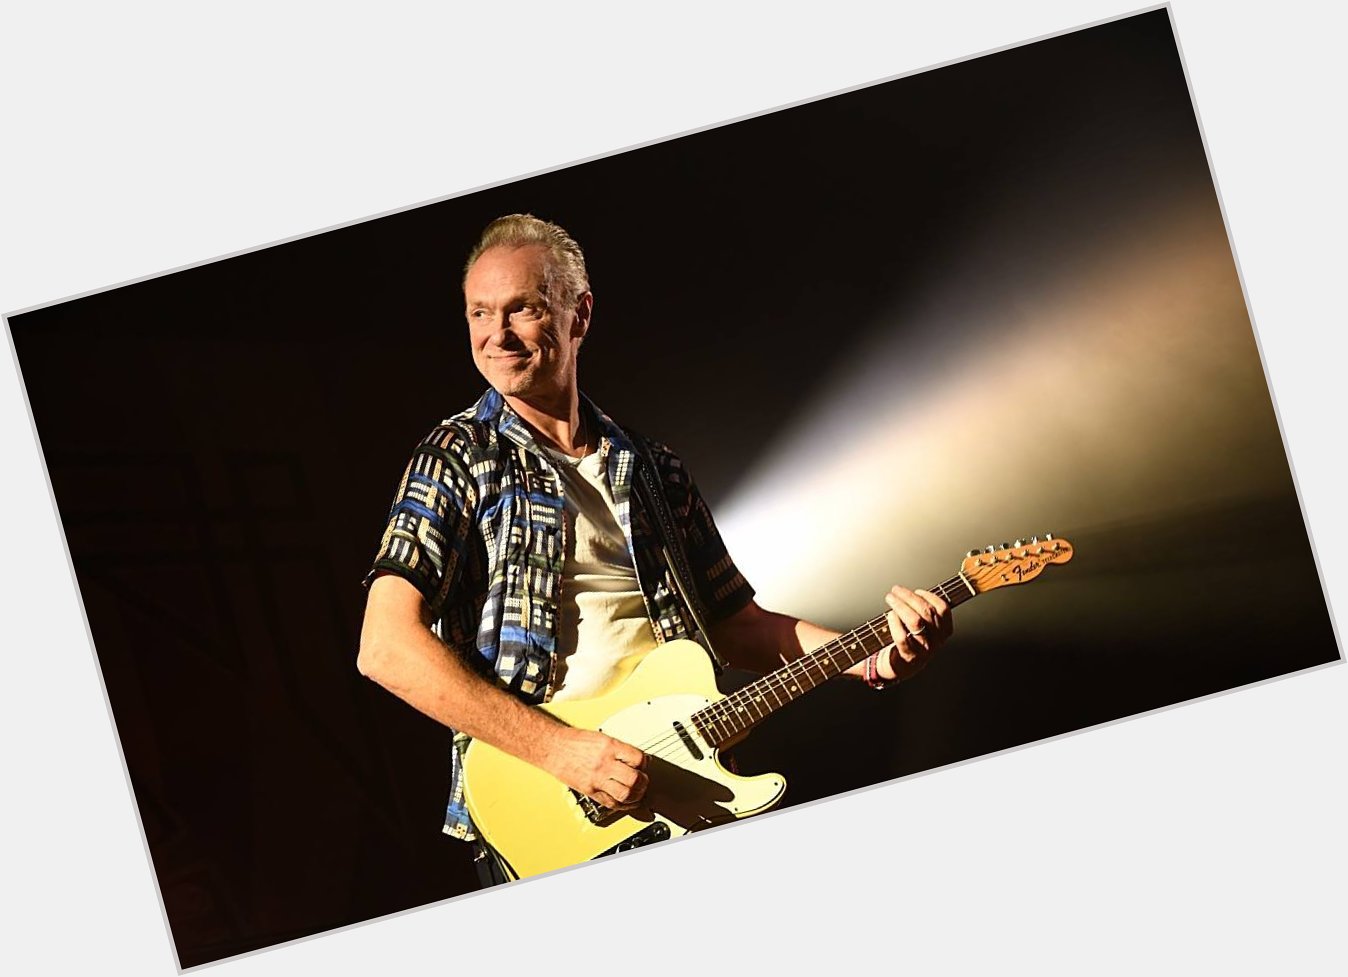 Happy Birthday to British musician, songwriter and actor Gary Kemp from Spandau Ballet. 